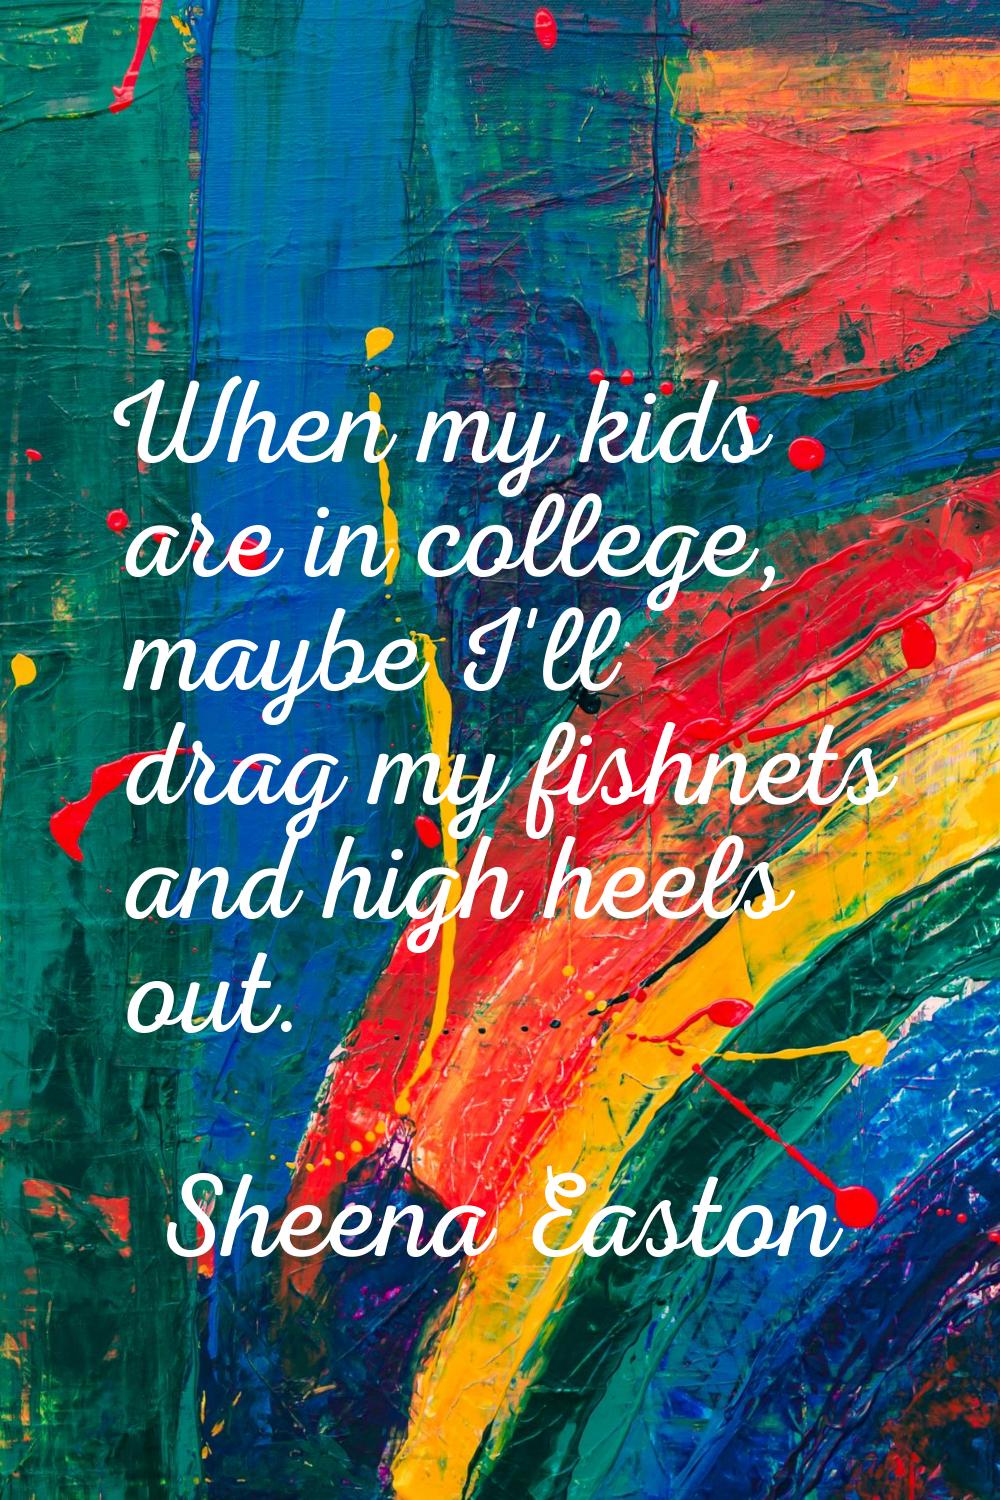 When my kids are in college, maybe I'll drag my fishnets and high heels out.